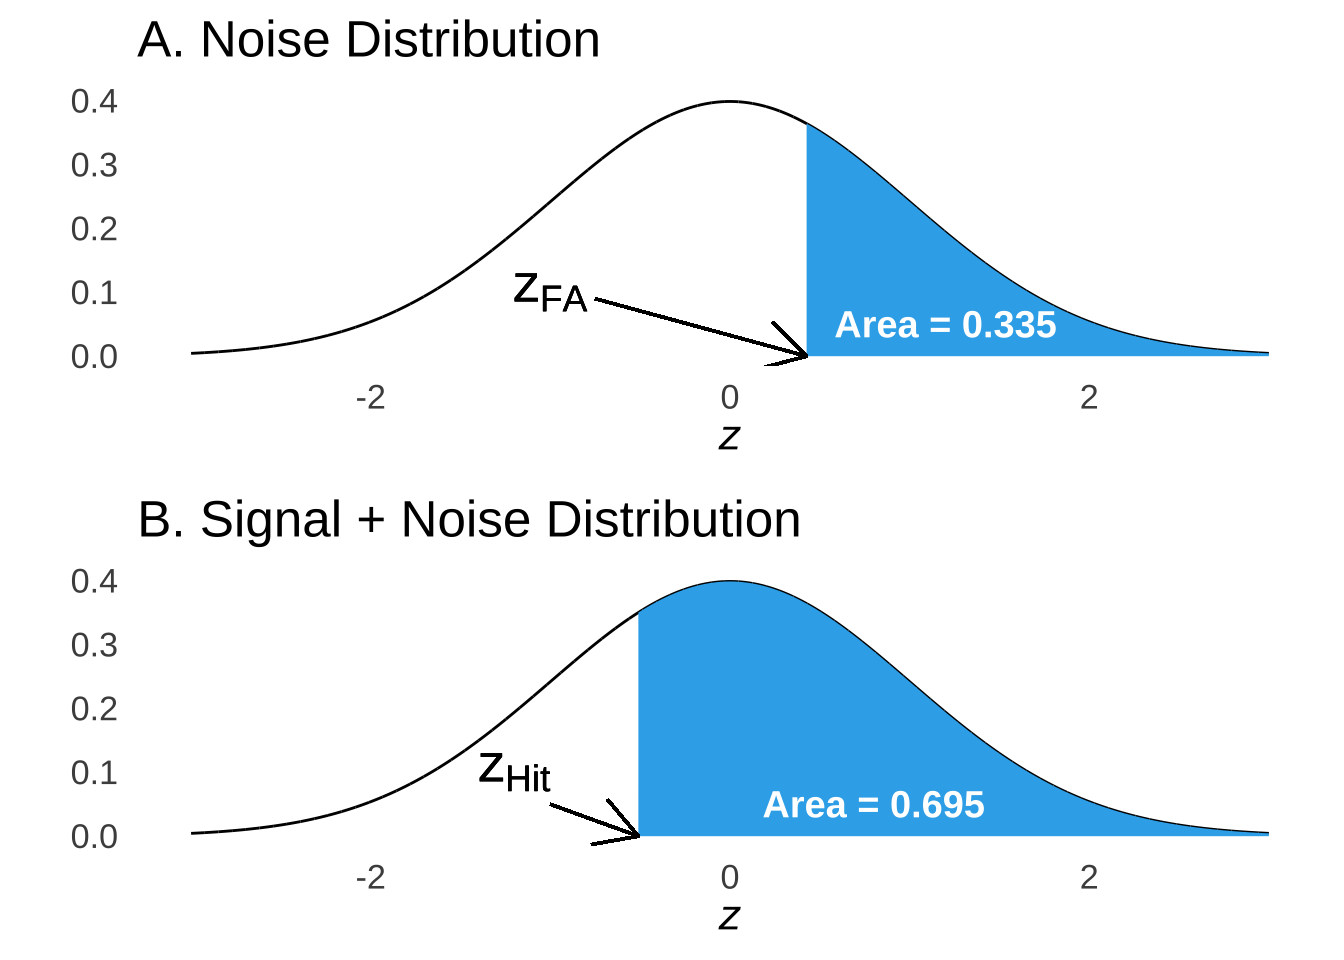 Areas Under the Noise and Signal + Noise Curves Indicating Probability of False Alarm and Hit, Respectively